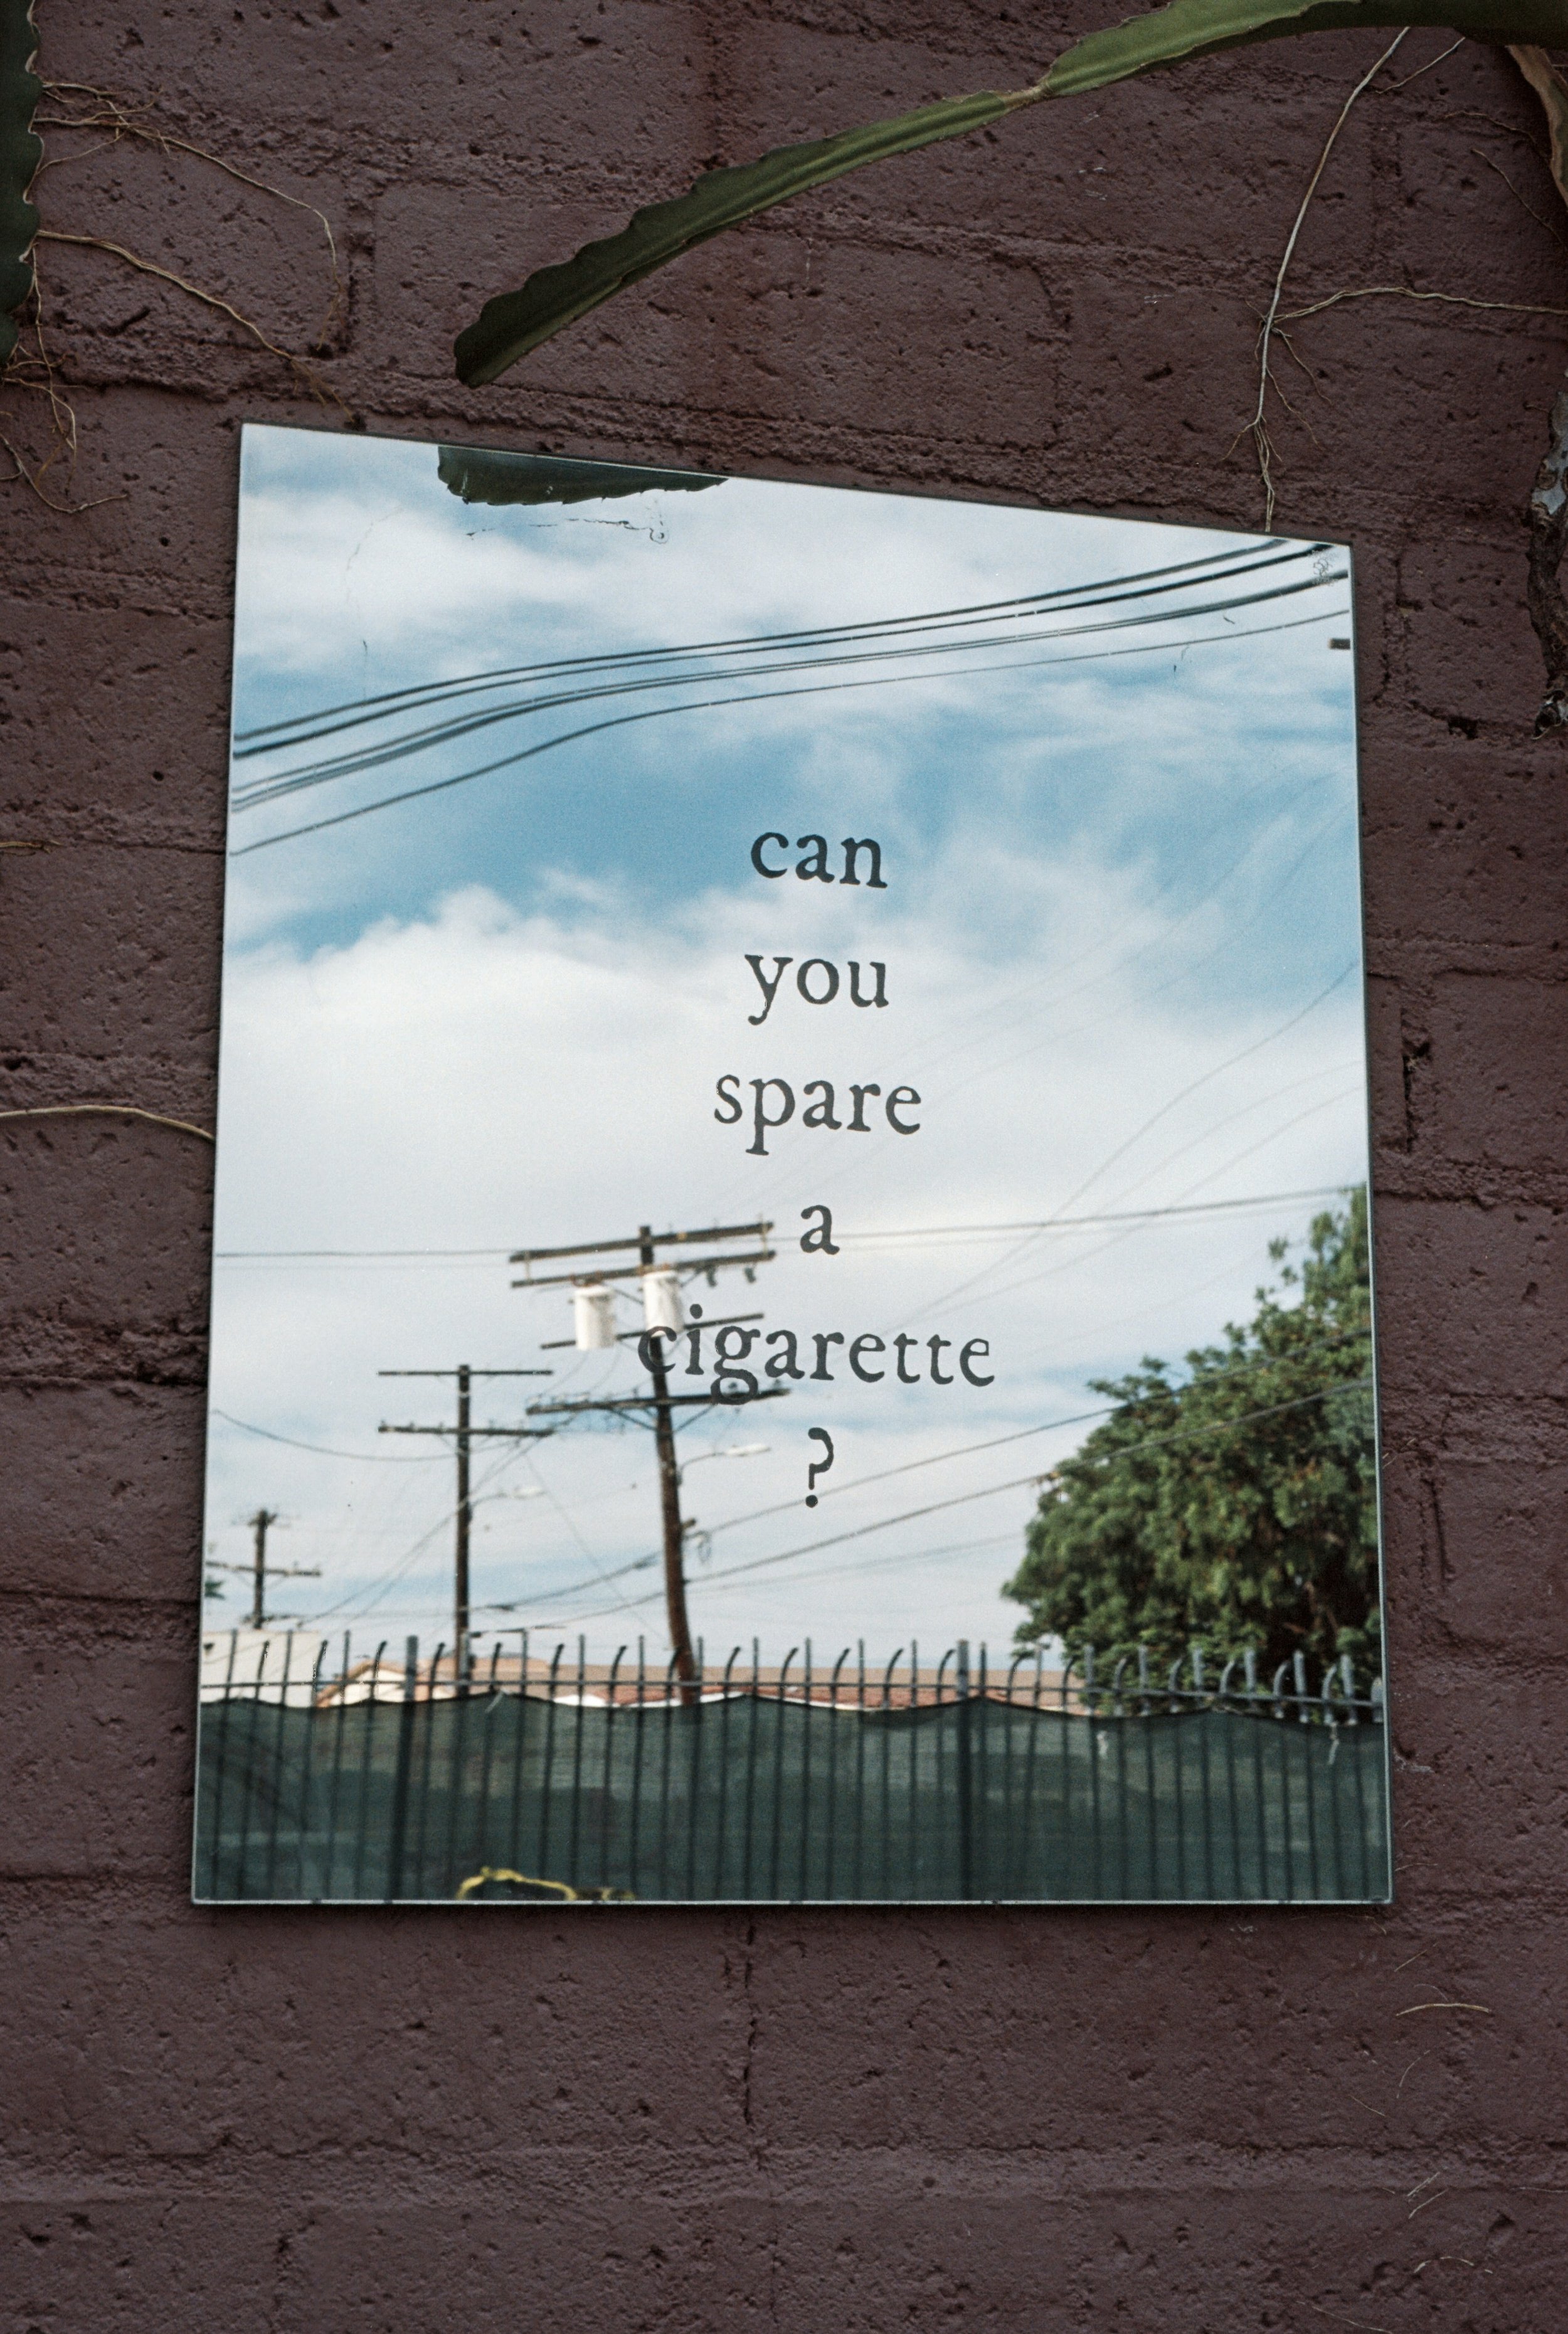 “can you spare a cigarette?”, Spy Projects Gallery